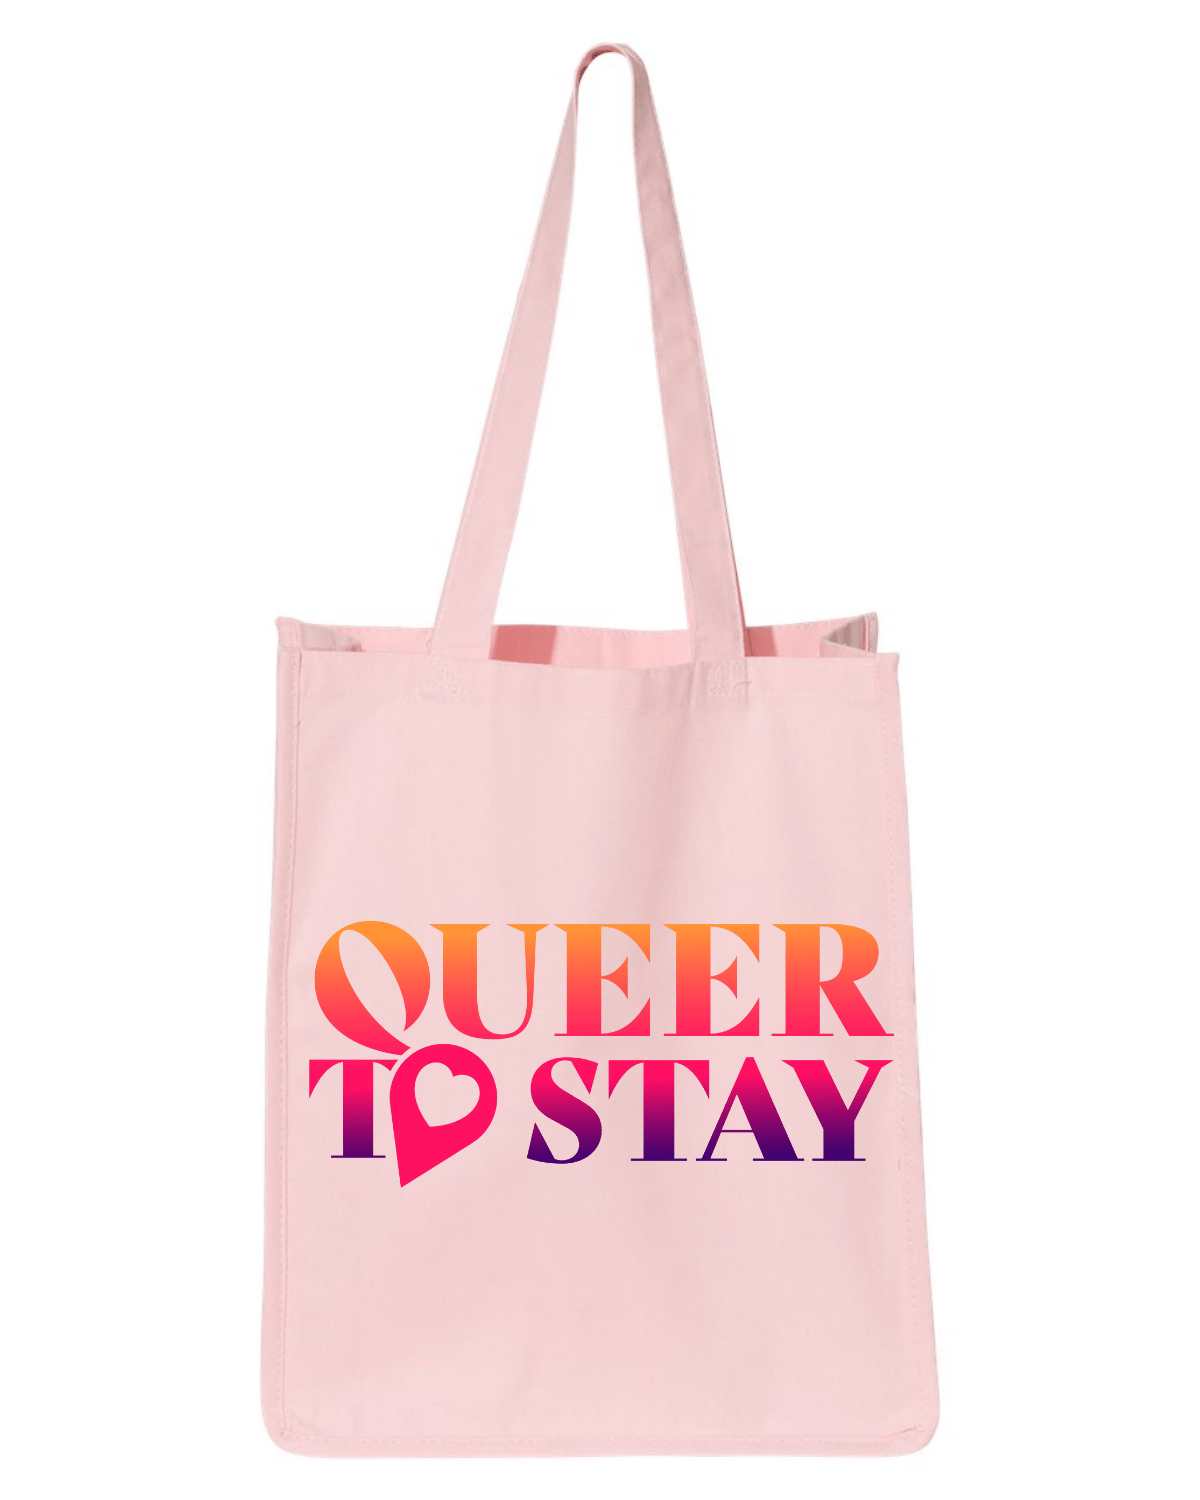 SHOWTIME Queer to Stay Jumbo Tote Bag - Paramount Shop